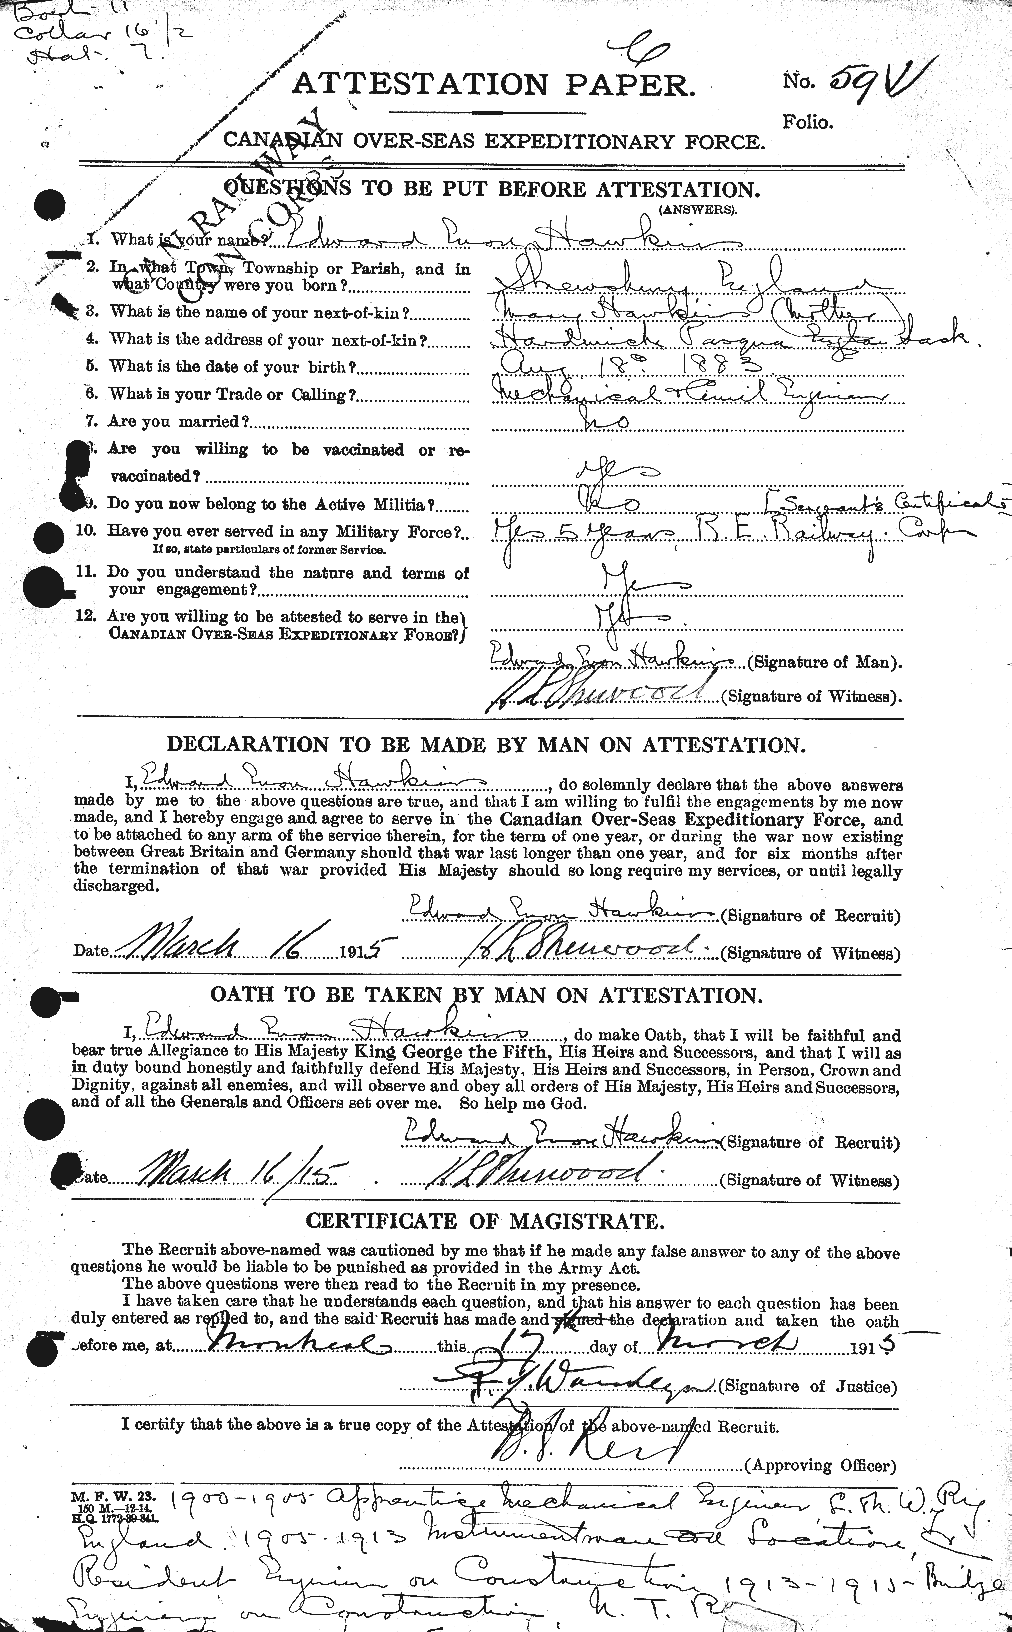 Personnel Records of the First World War - CEF 387074a